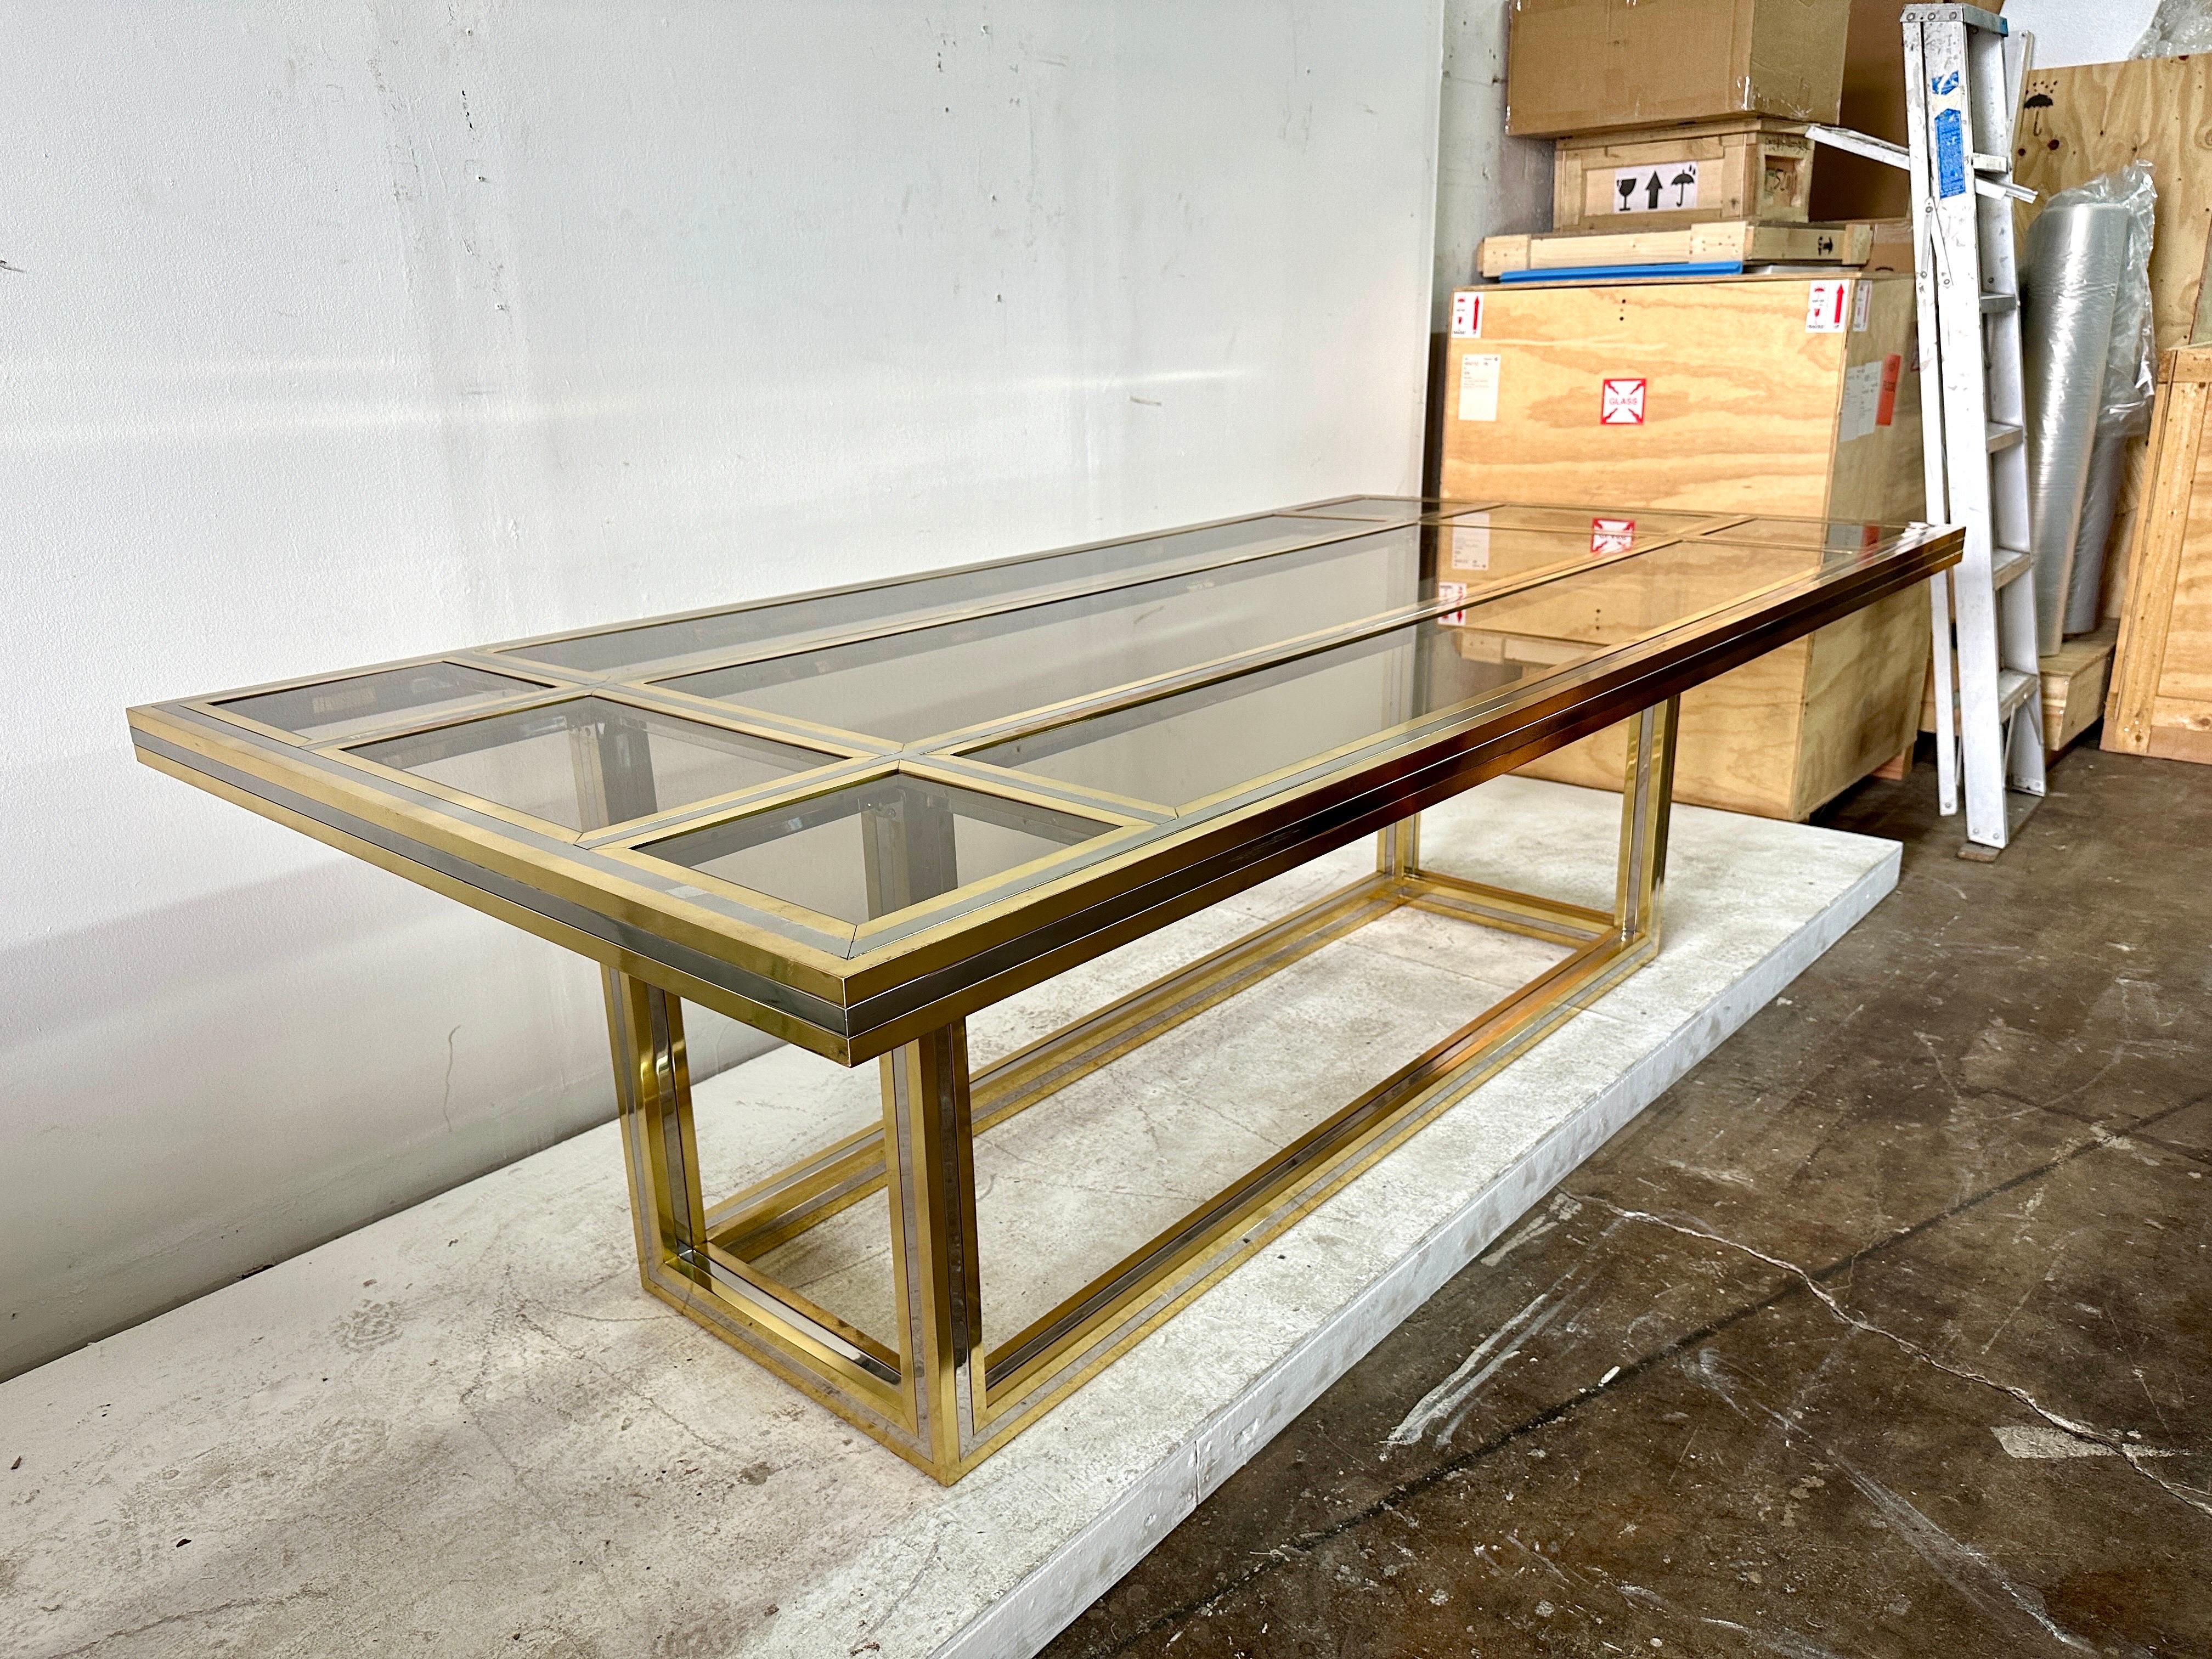 Vintage SIGNED Romeo Rega mixed-metals dining table with 9 glass insets (lightly smoked glass).  The table is heavy and solid, a true design masterpiece from the 1970's.  There are a few areas where the brass has taken on a darker patina.  NOTE: